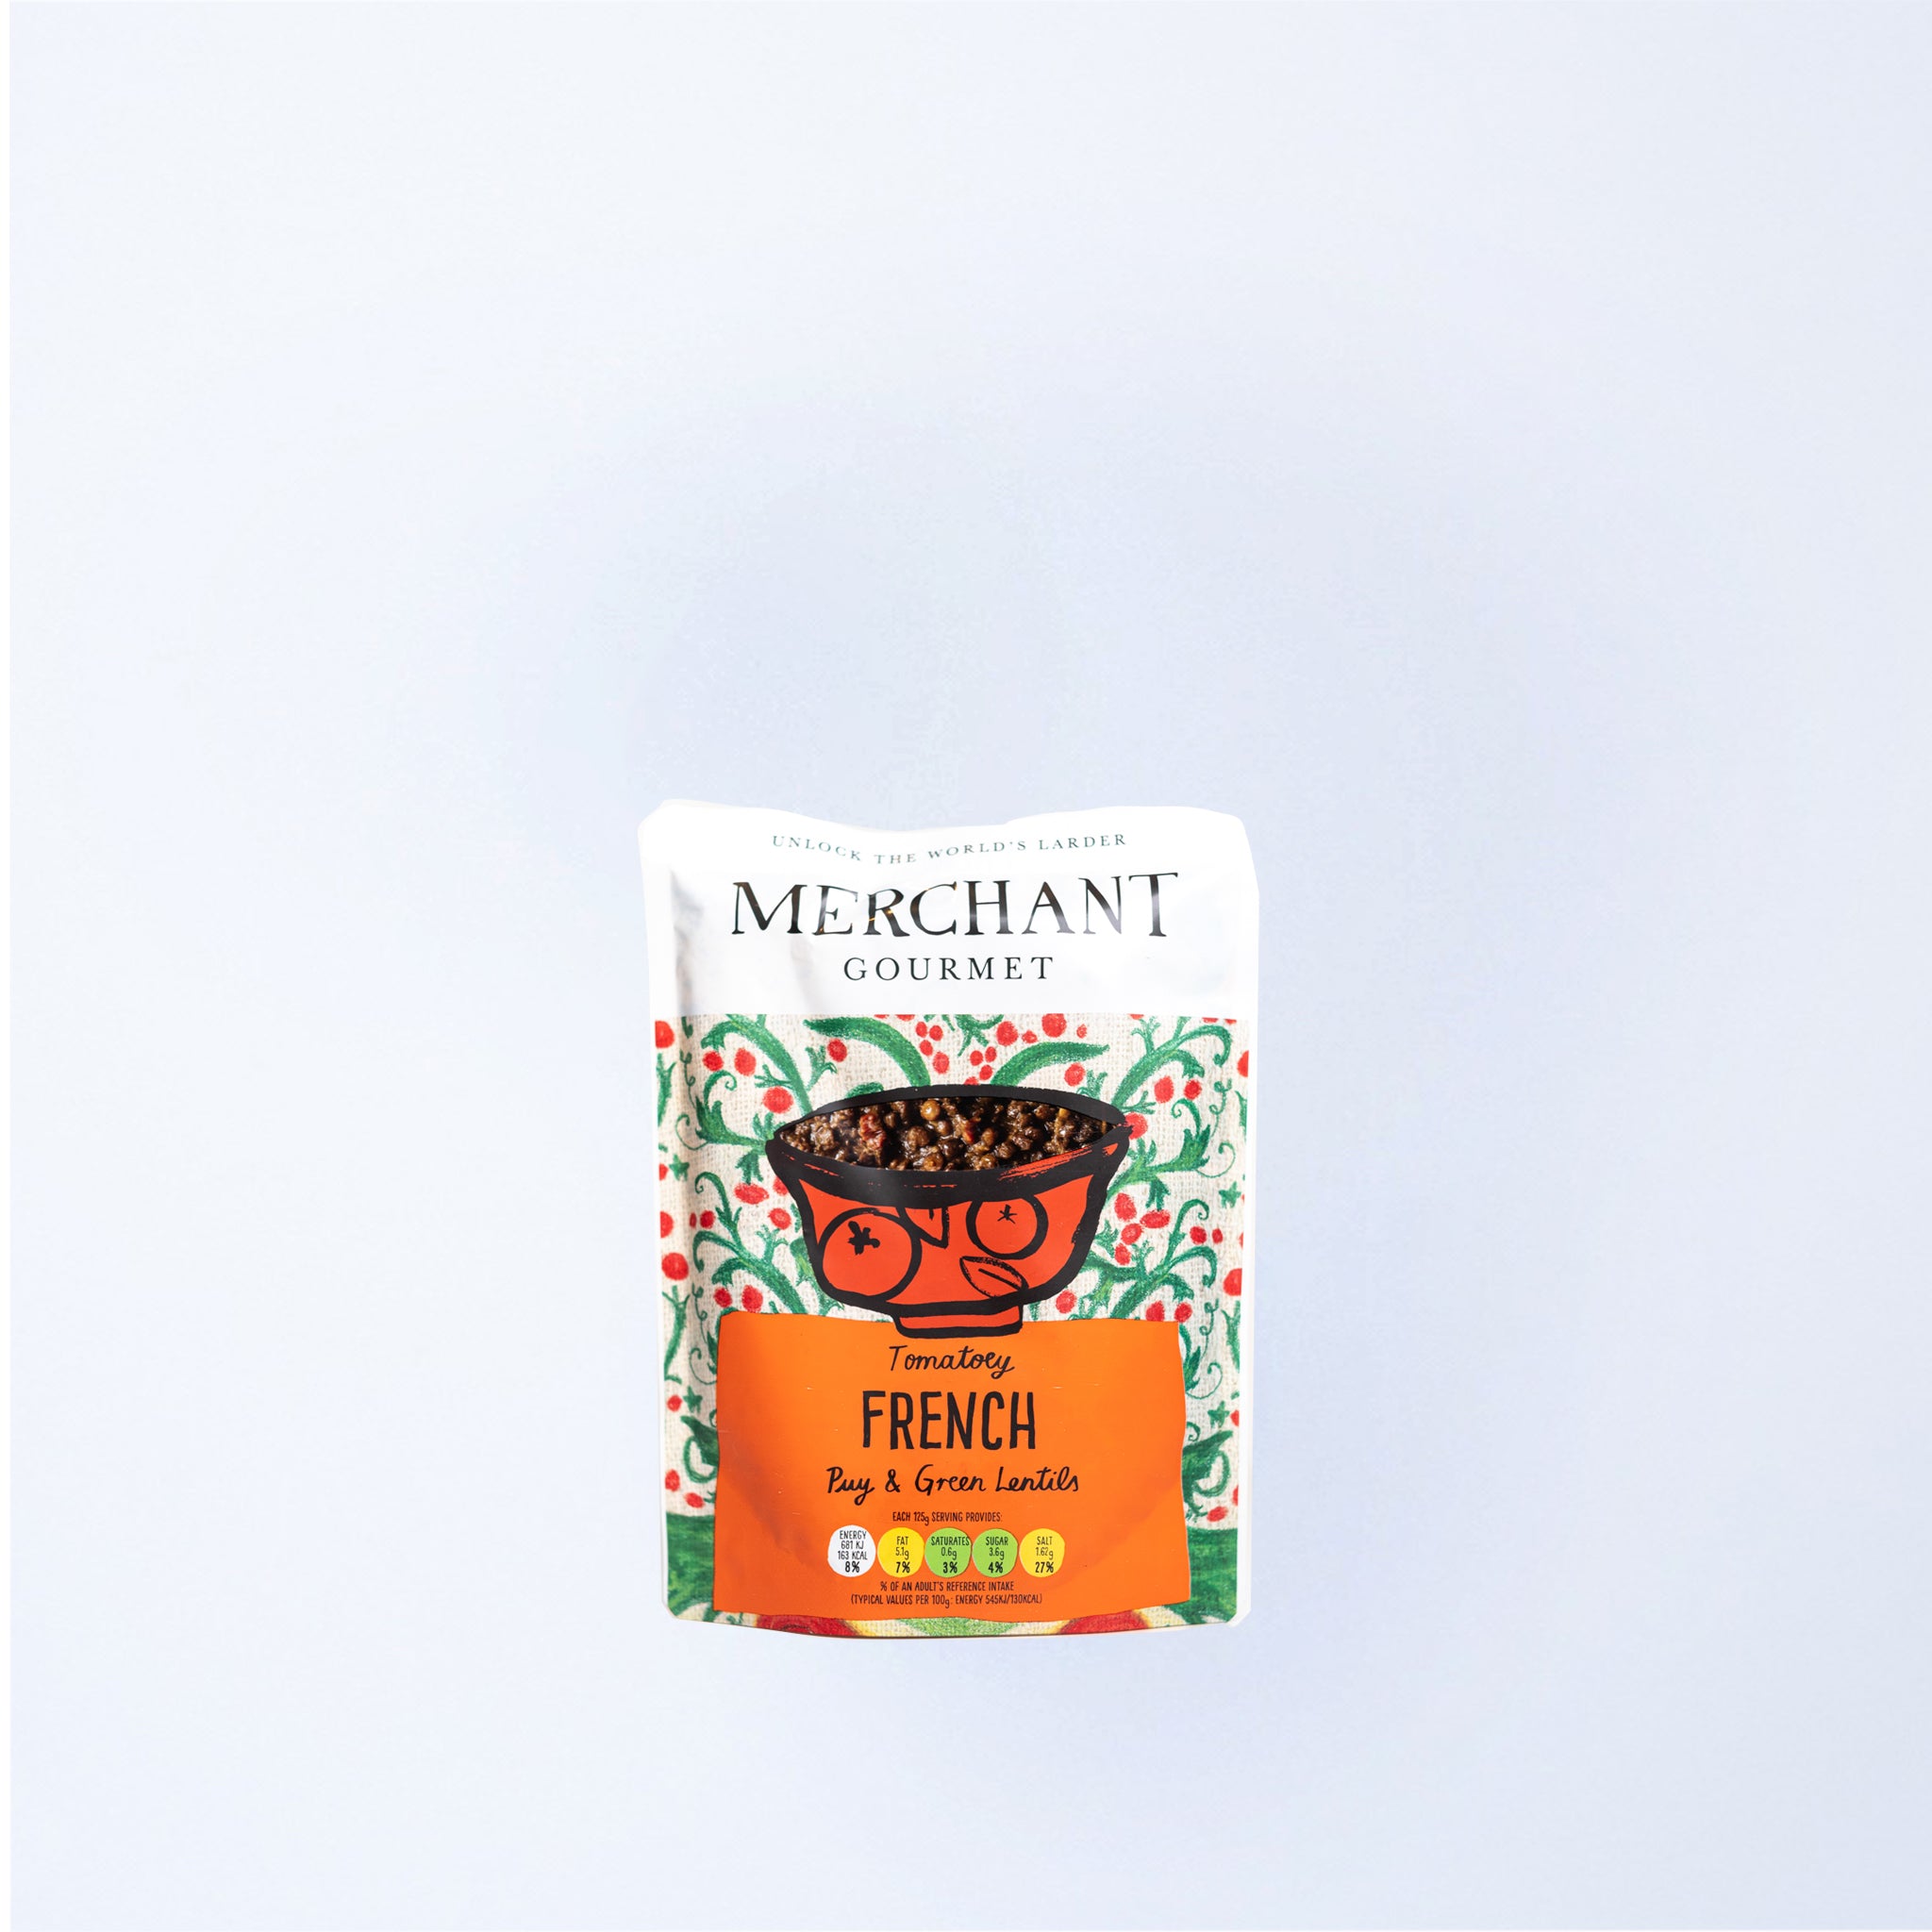 A bag of Merchant Gourmet French Inspired Tomatoey Lentils 250g.